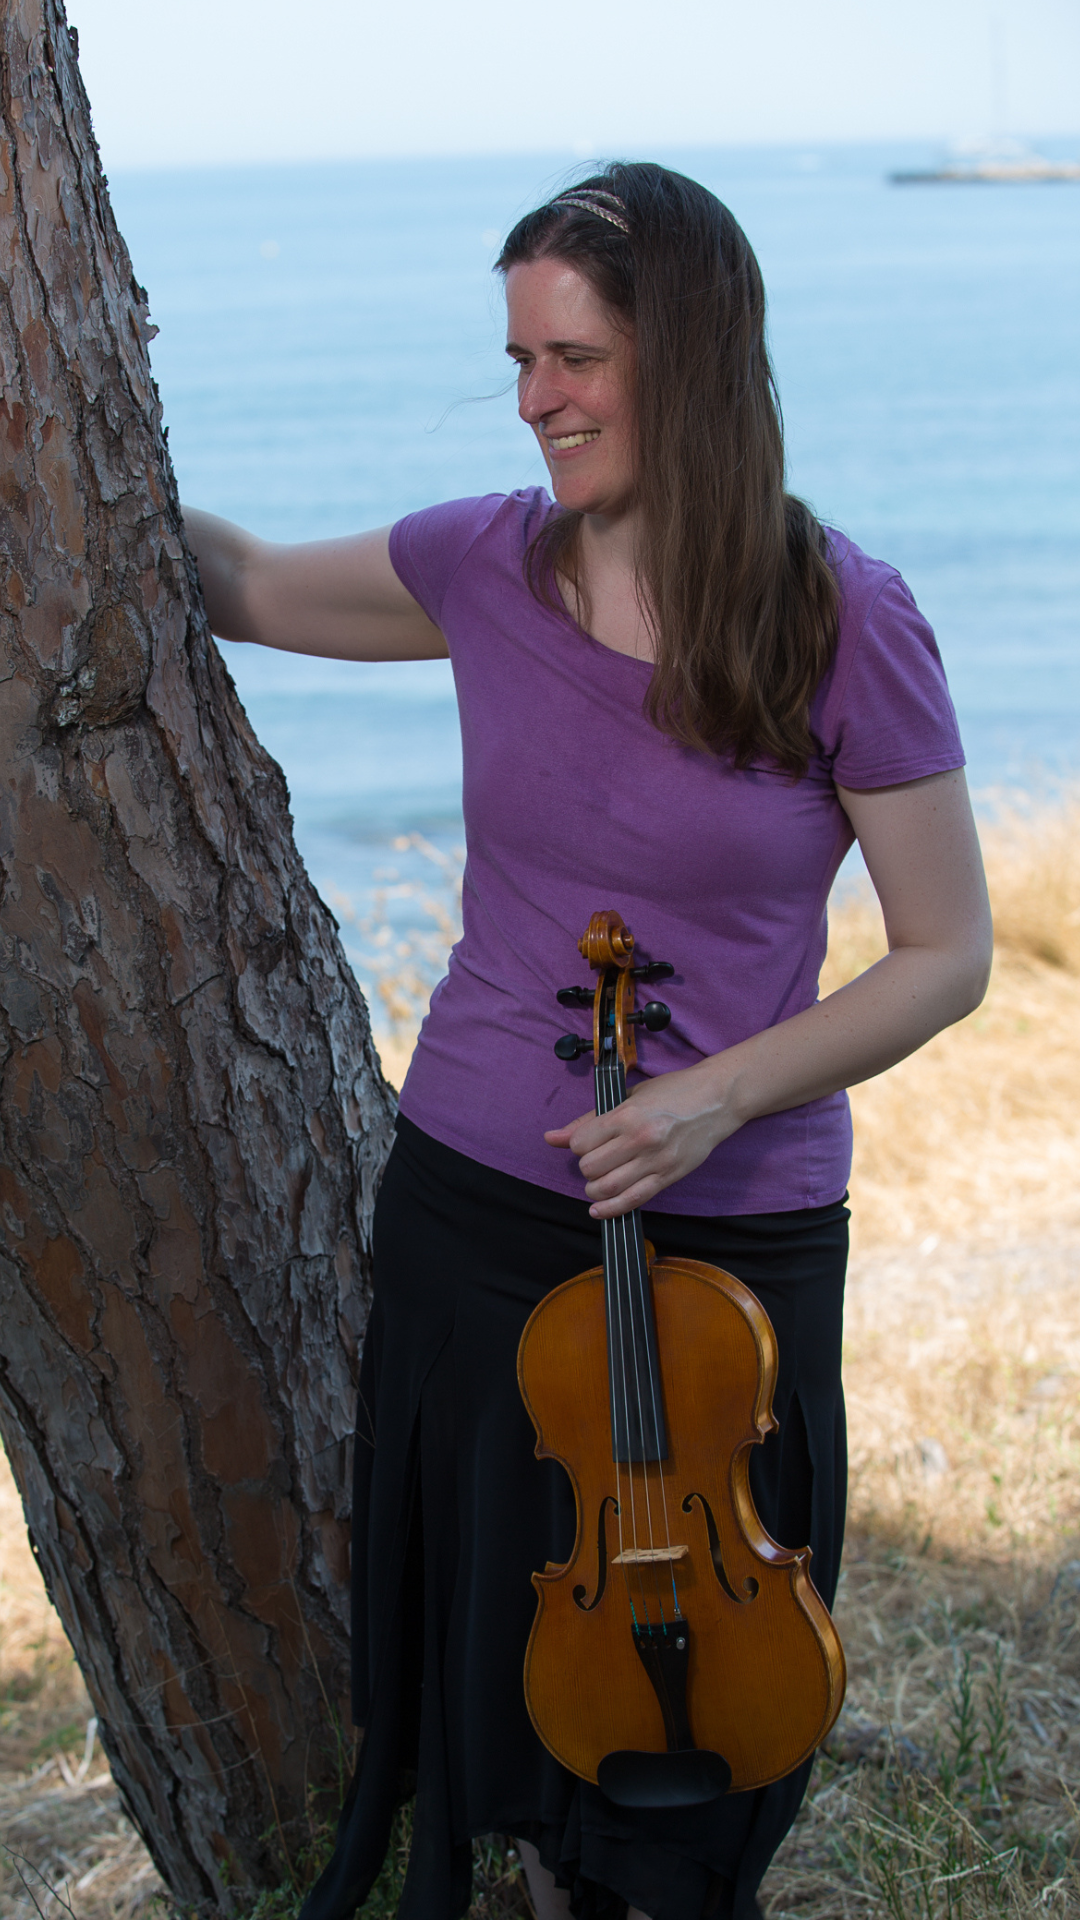 Leah Irby in a purple shirt and black skirt standing with a viola in her hands next to a tree overlooking the water.